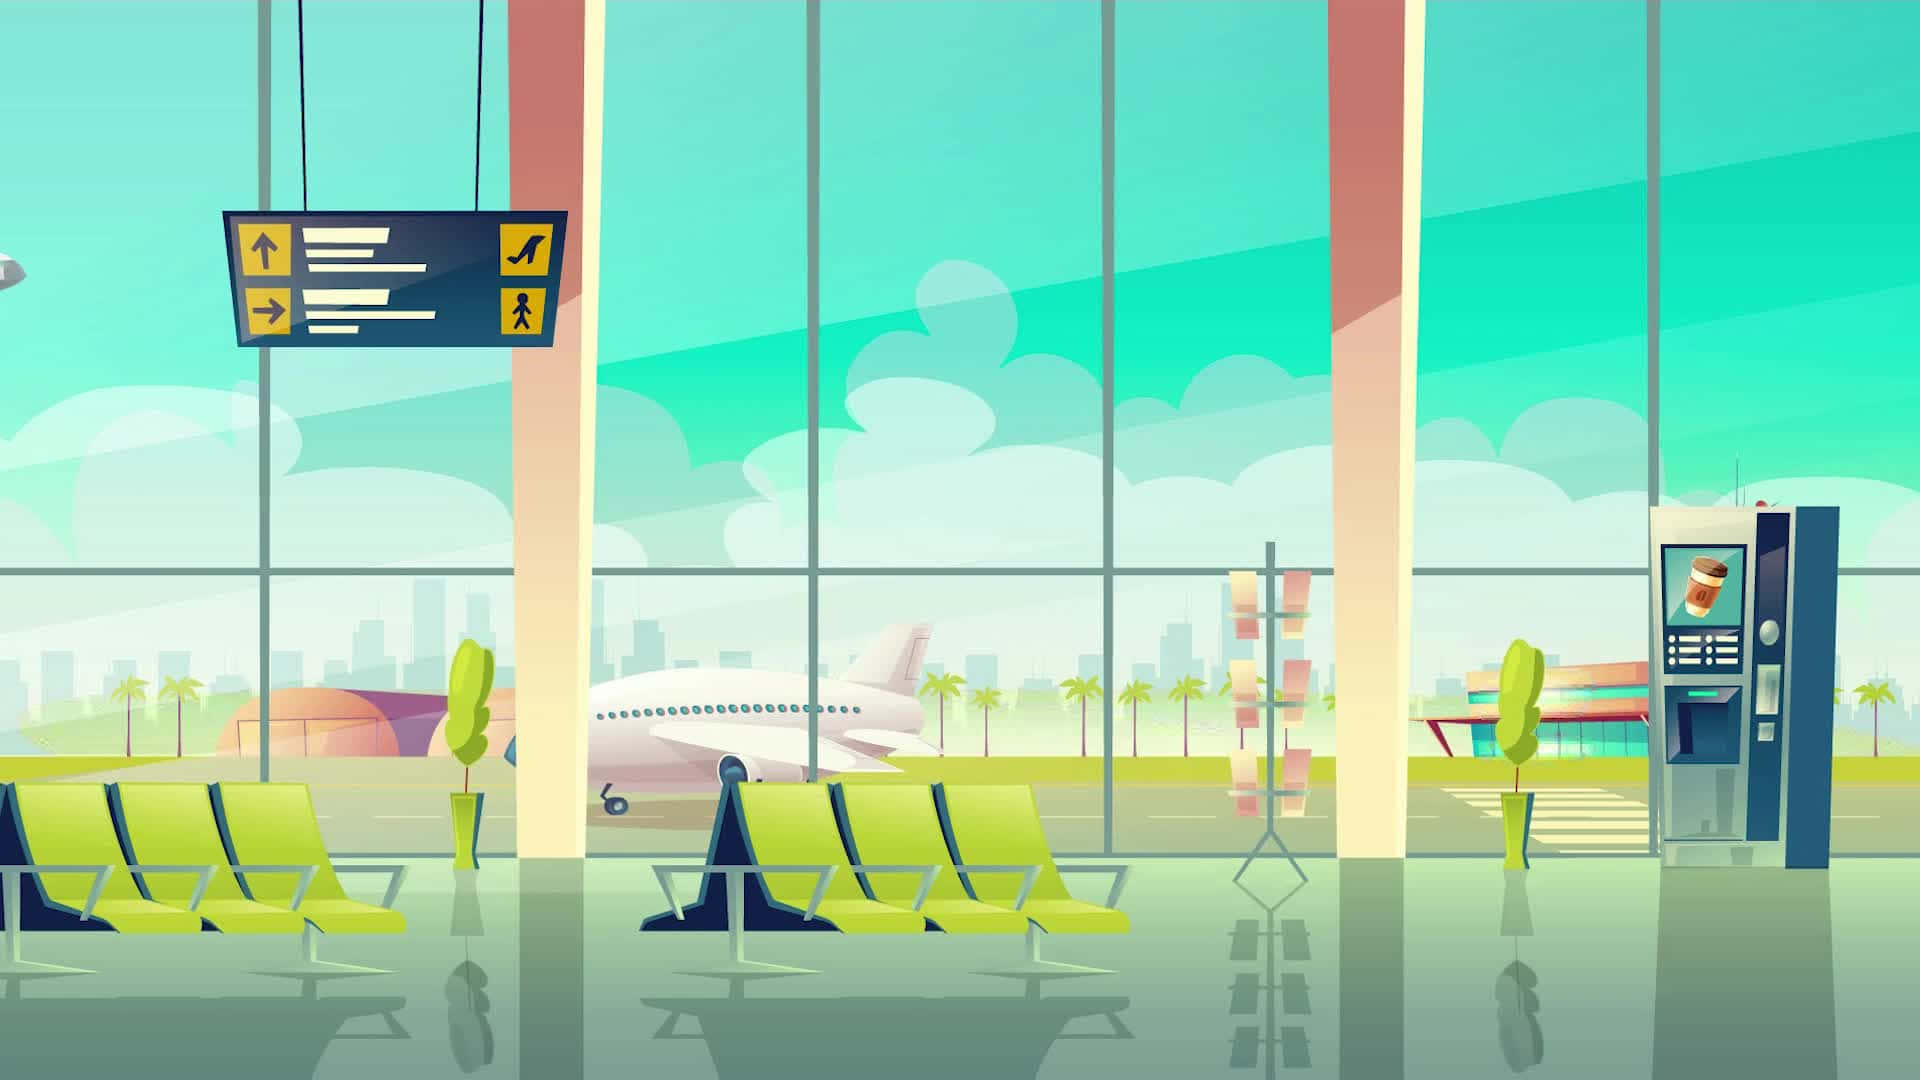 Welcome to the airport, the starting point of your journey